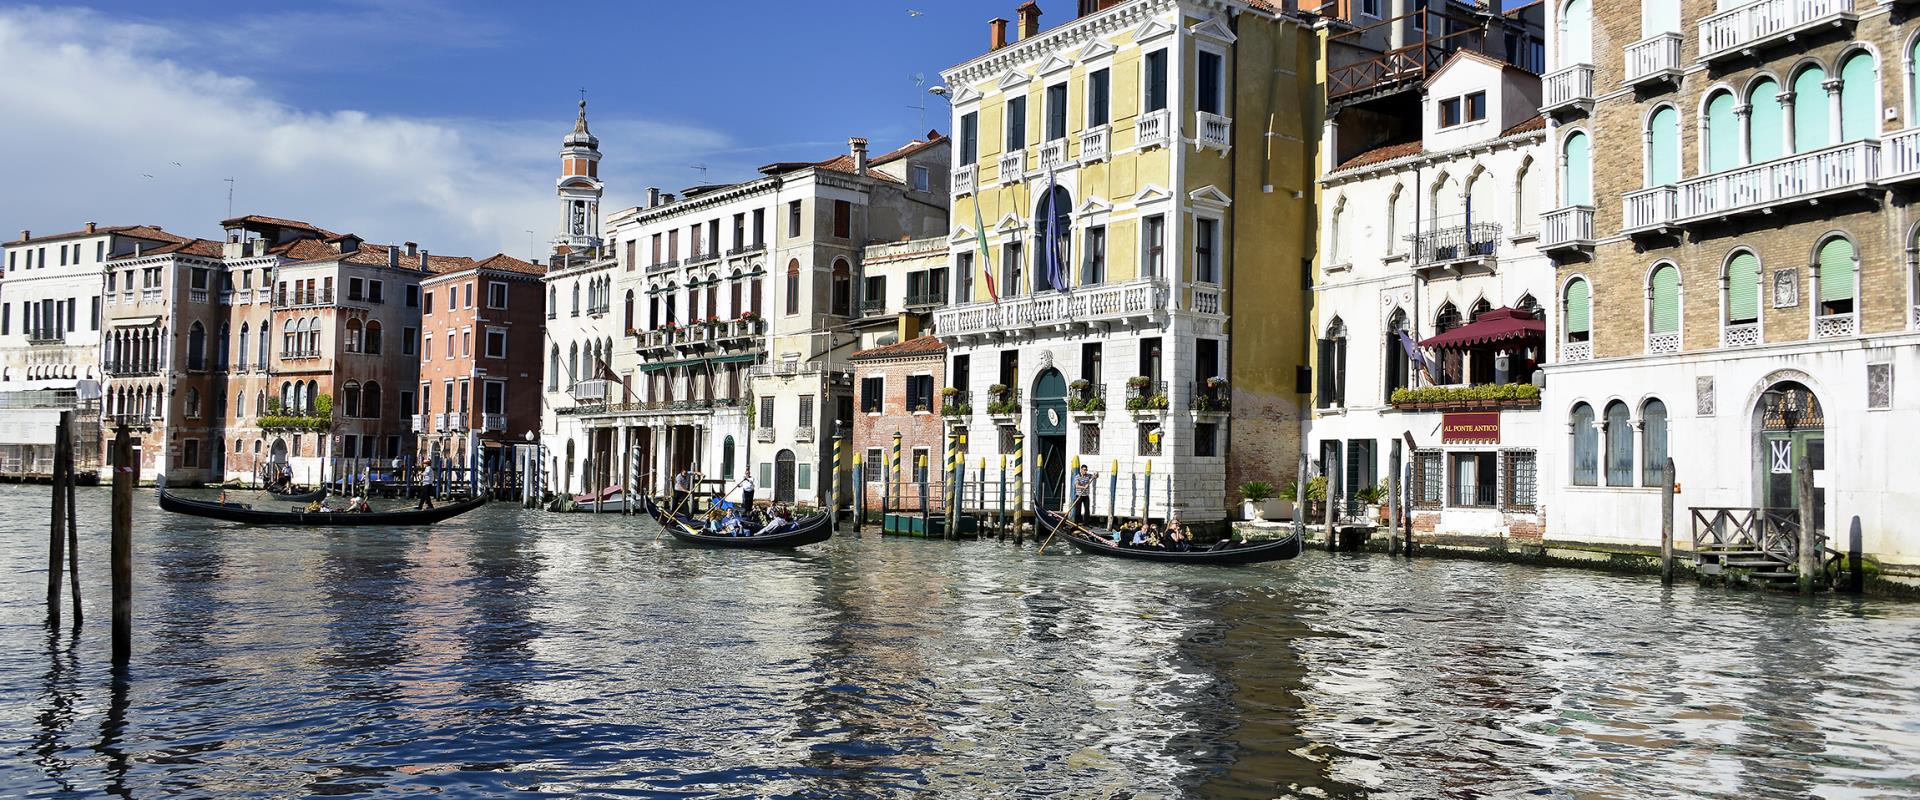 The most convenient way to visit Venice-Book Best Western Plus Hotel Bologna in Mestre, 4 star hotel 10 minutes distance from the historic center of Venice.